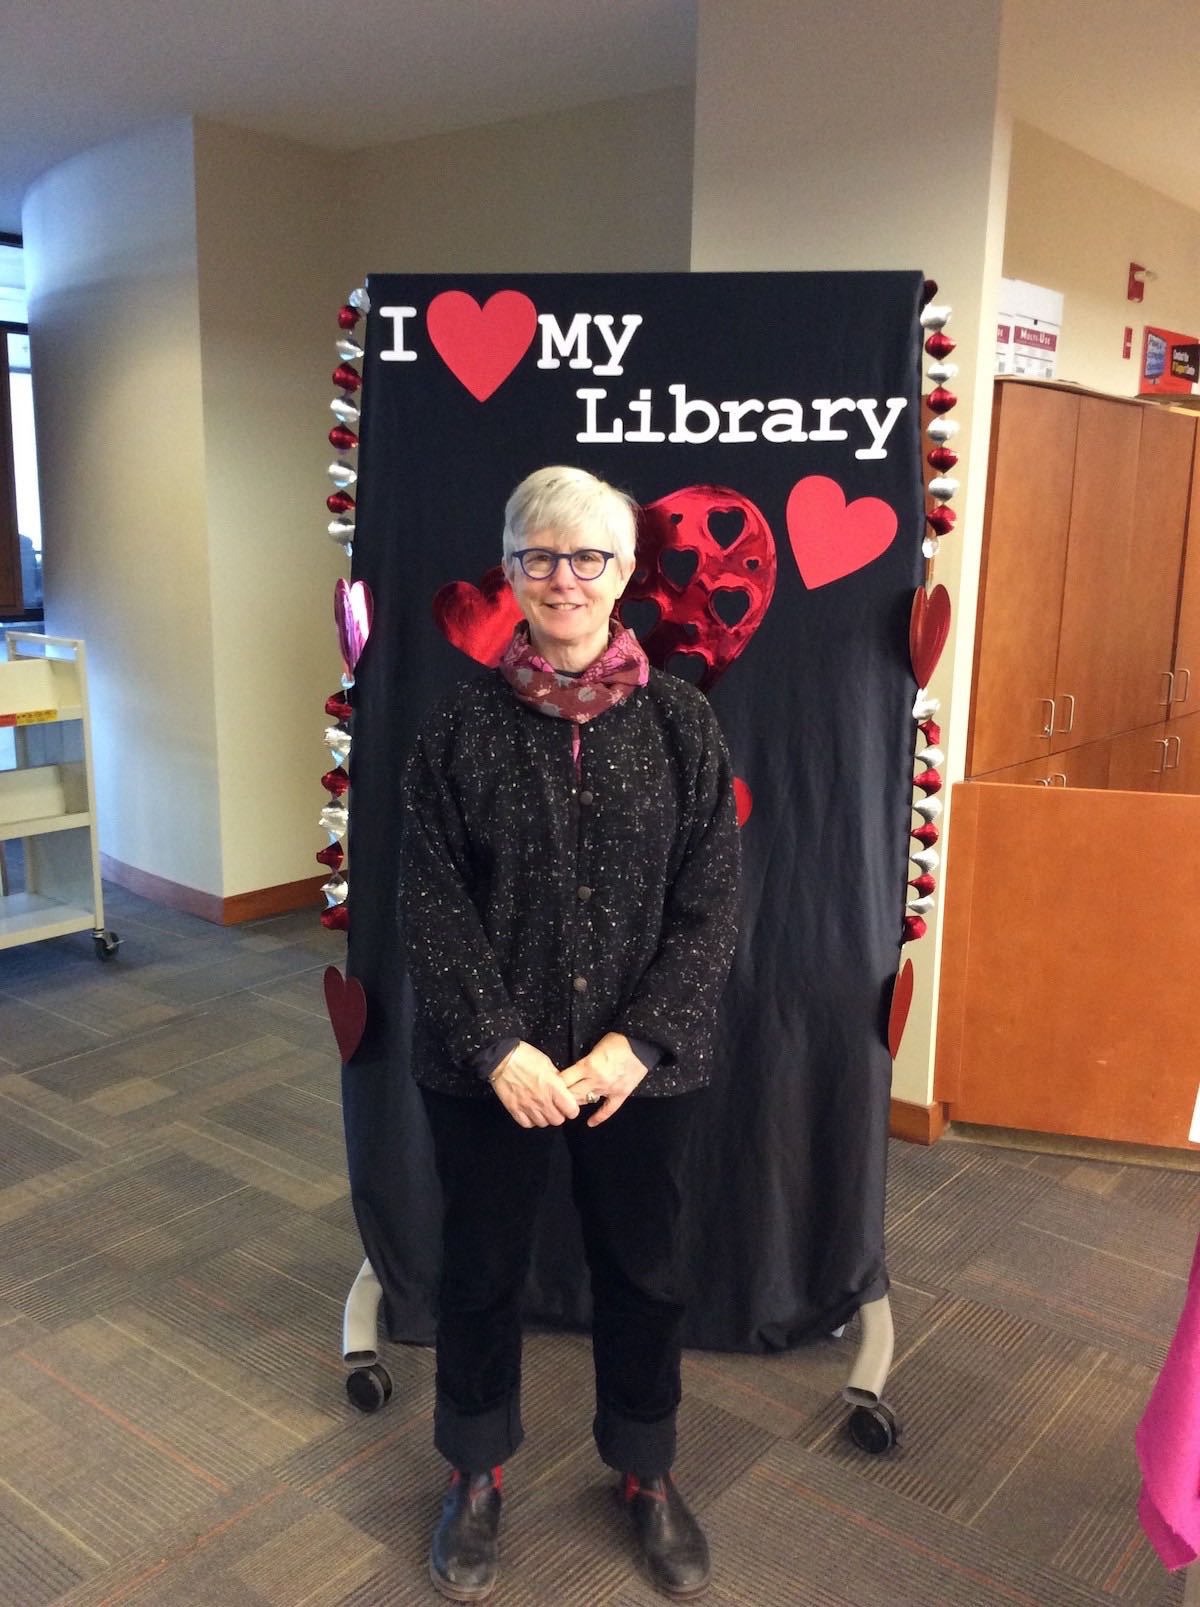 Associate University Librarian for Teaching, Learning and Research Colleen Murphy stands in front of the I love my library backdrop, holding her hands in front of herself and smiling